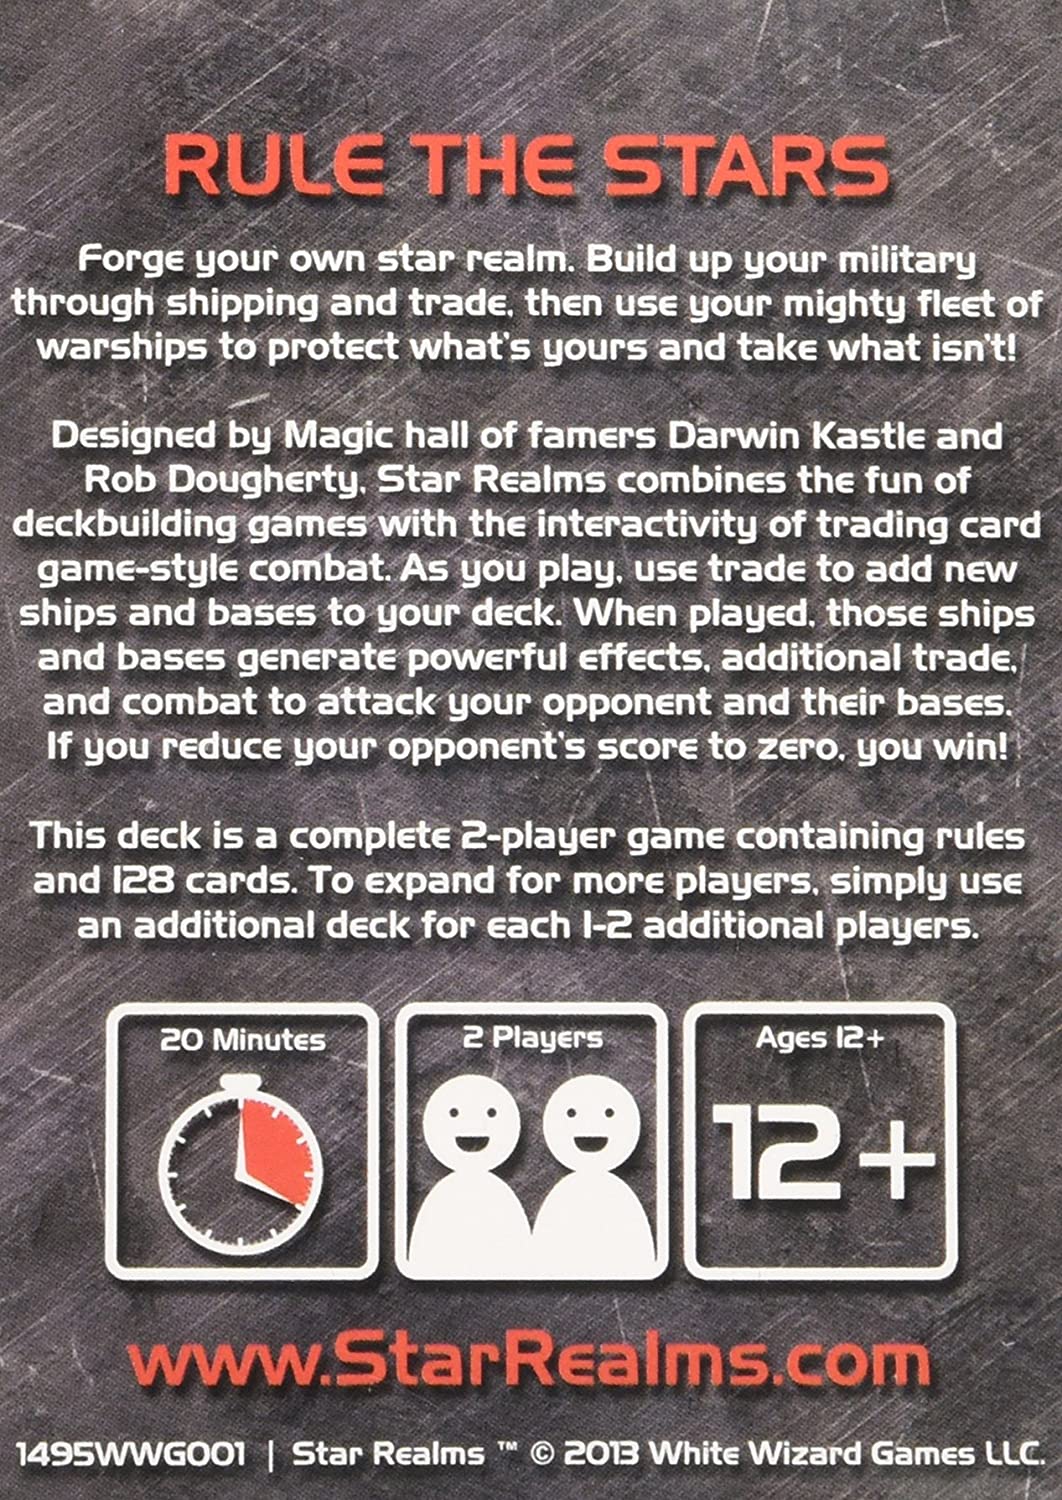 Find out about Star Realms